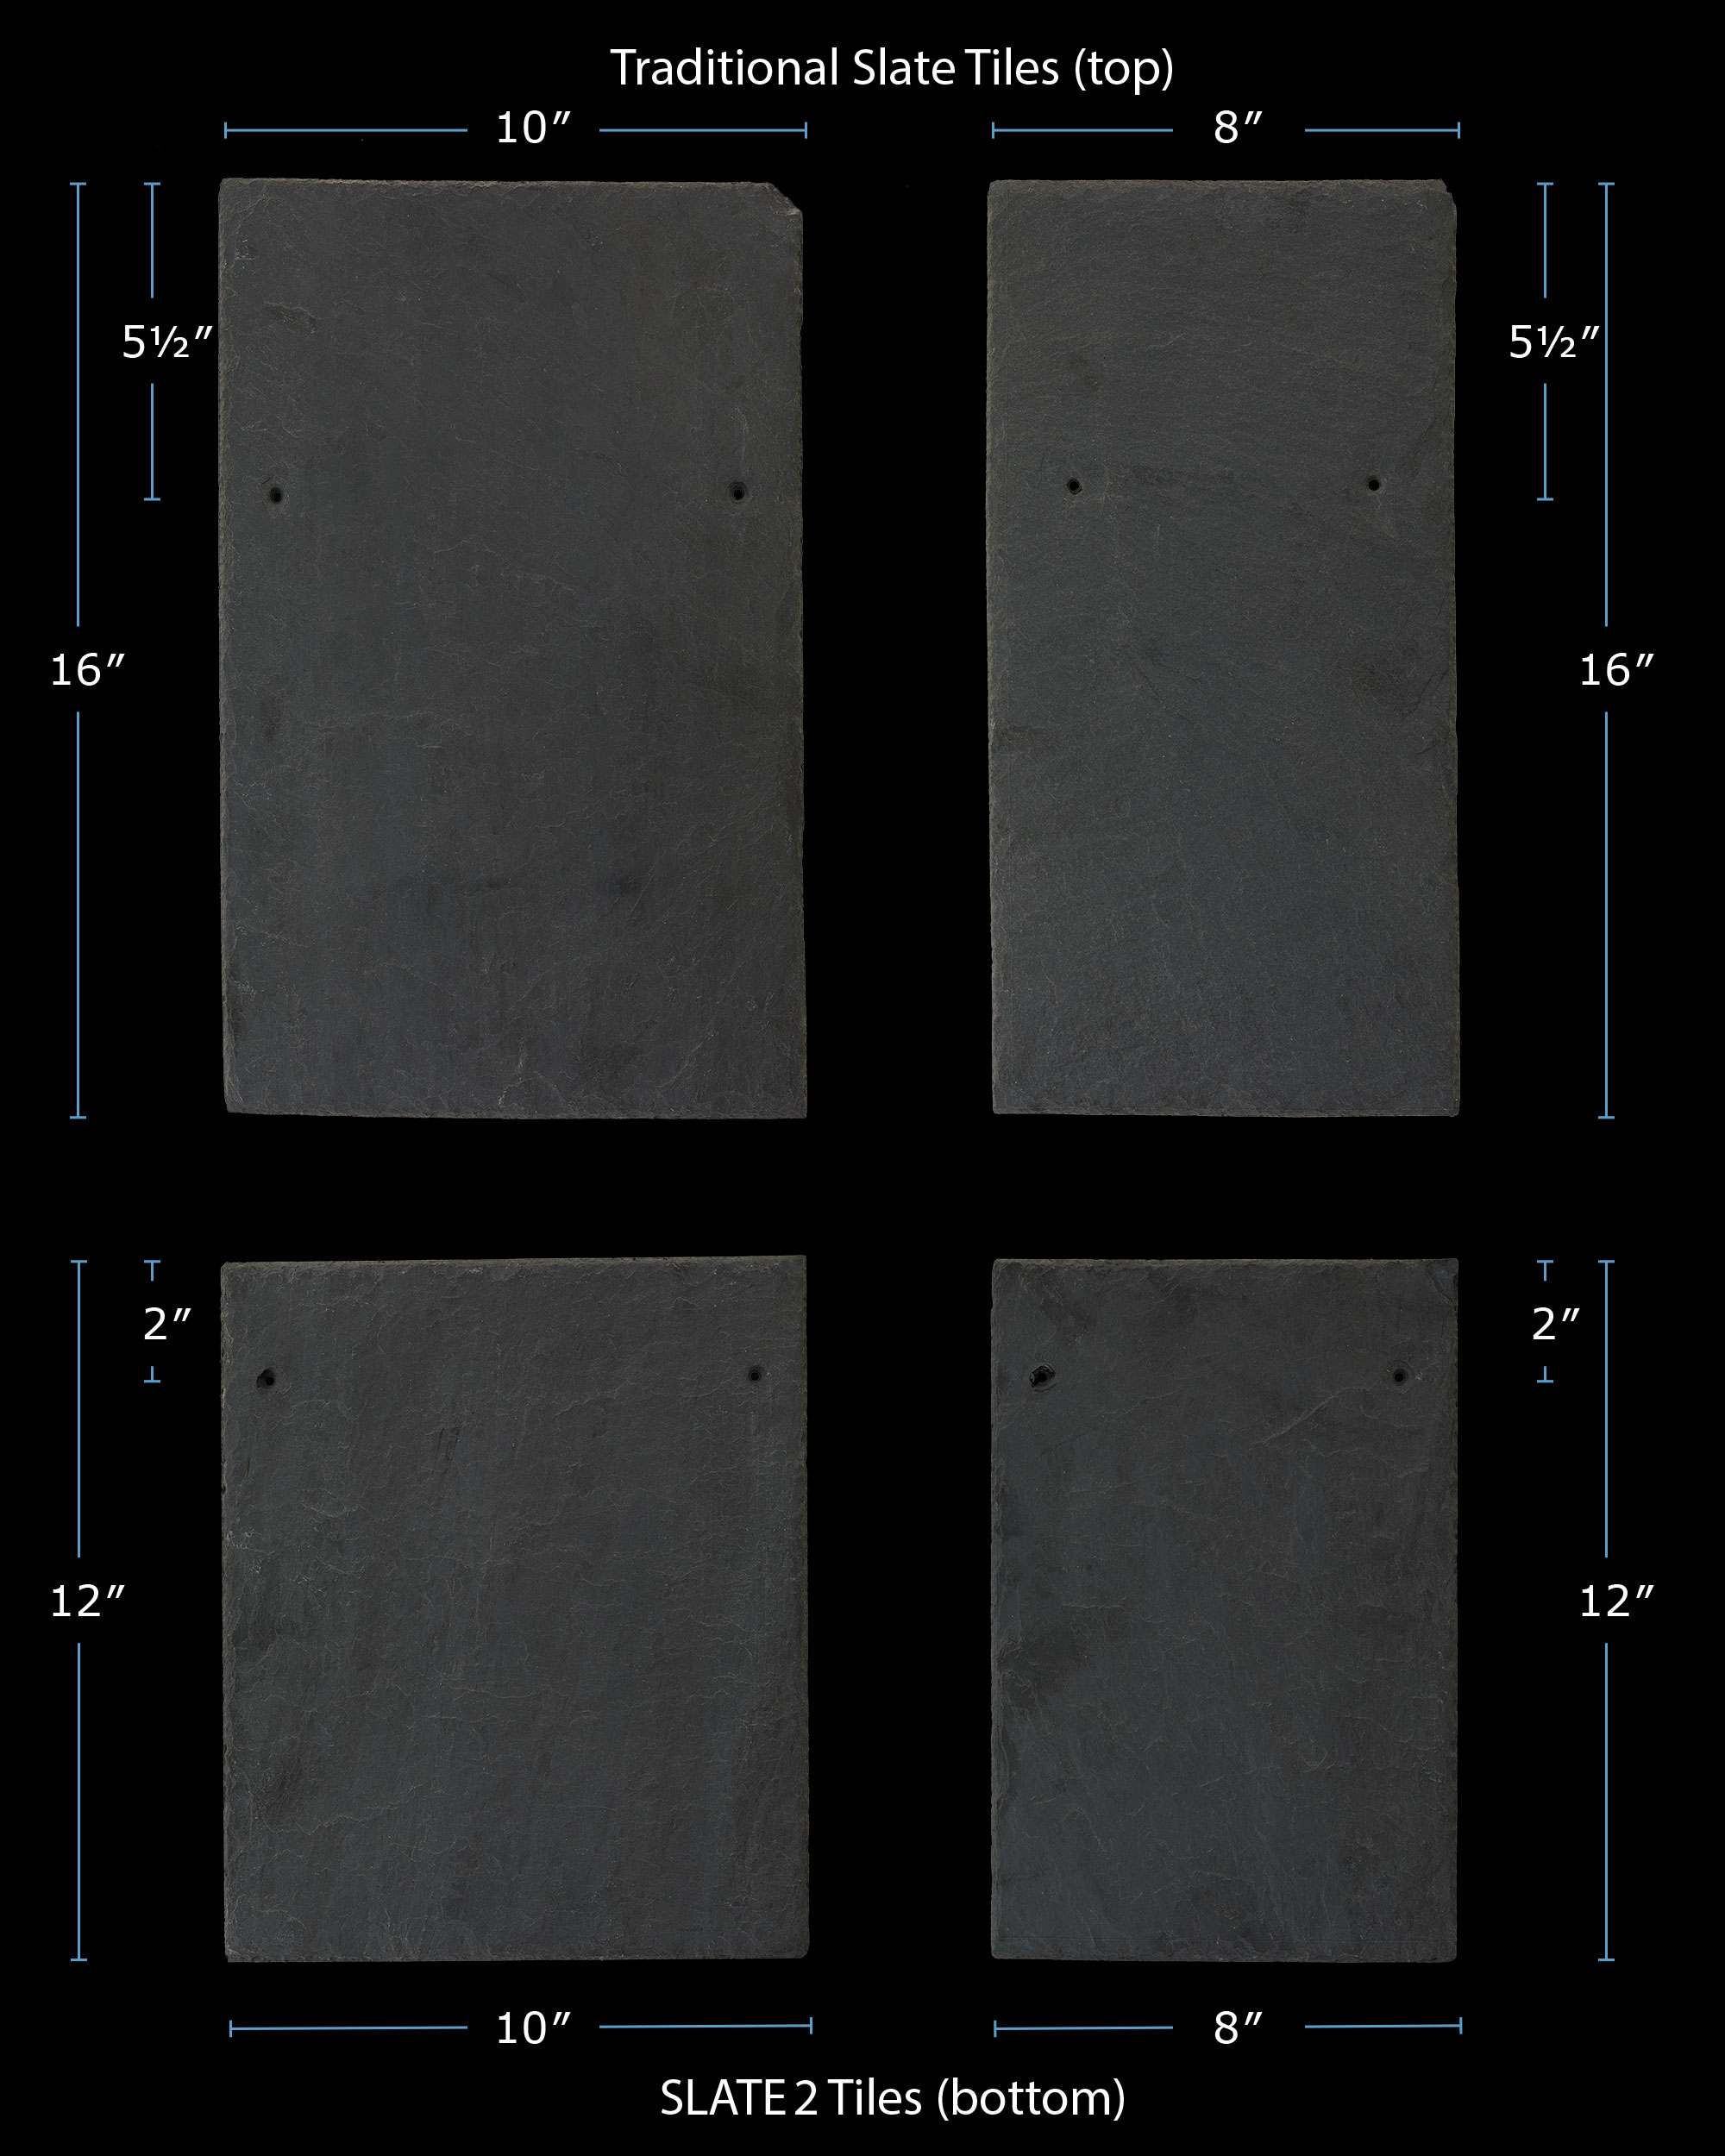 Traditional and Slate2 Tiles compared with dimensions.